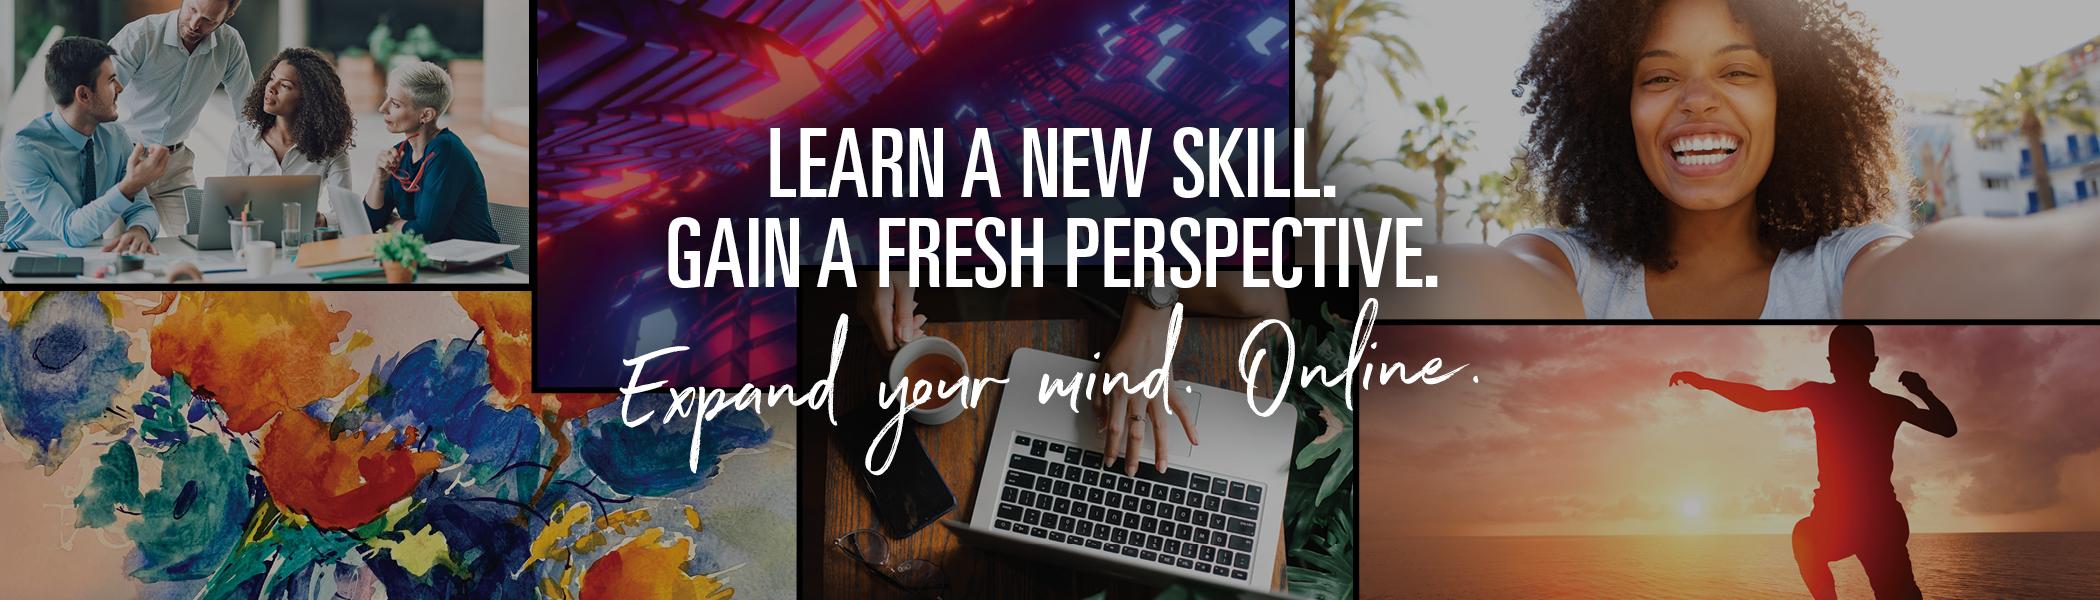 Learn a new skill.
Gain a Fresh Perspective
Expand your mind. Online.